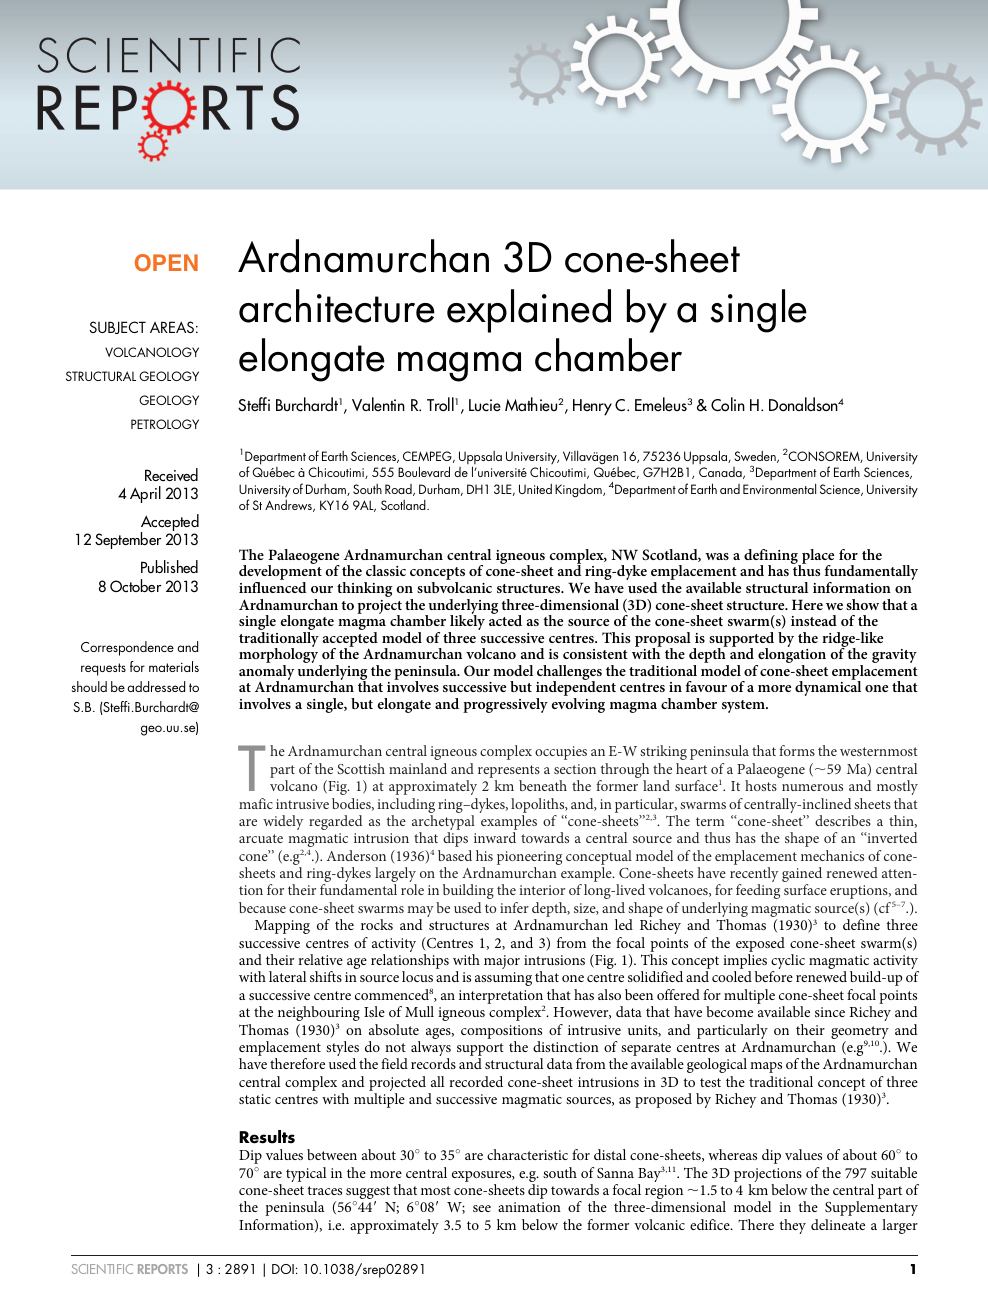 Ardnamurchan 3d Cone Sheet Architecture Explained By A Single Elongate Magma Chamber Topic Of Research Paper In Earth And Related Environmental Sciences Download Scholarly Article Pdf And Read For Free On Cyberleninka